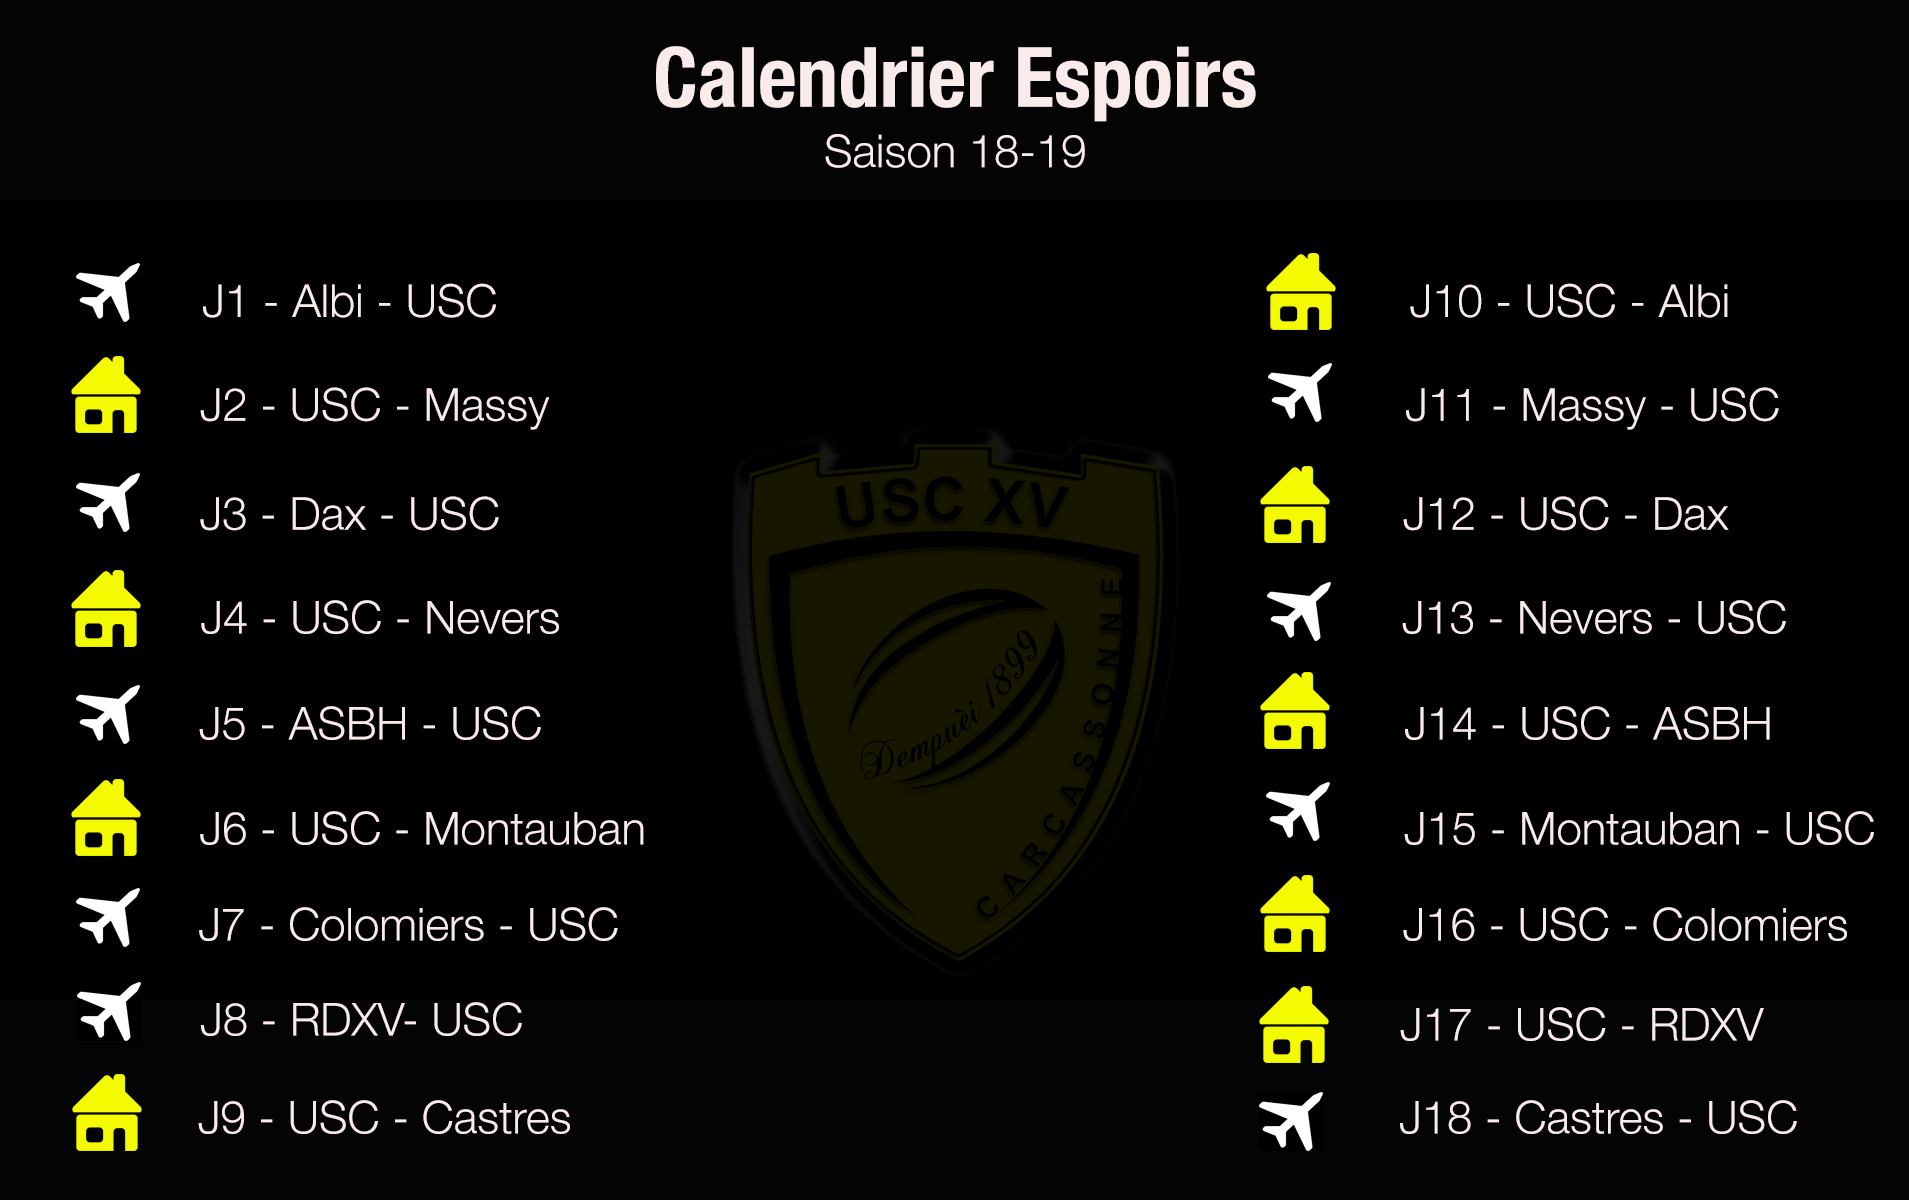 CalendrierEspoirs18-19